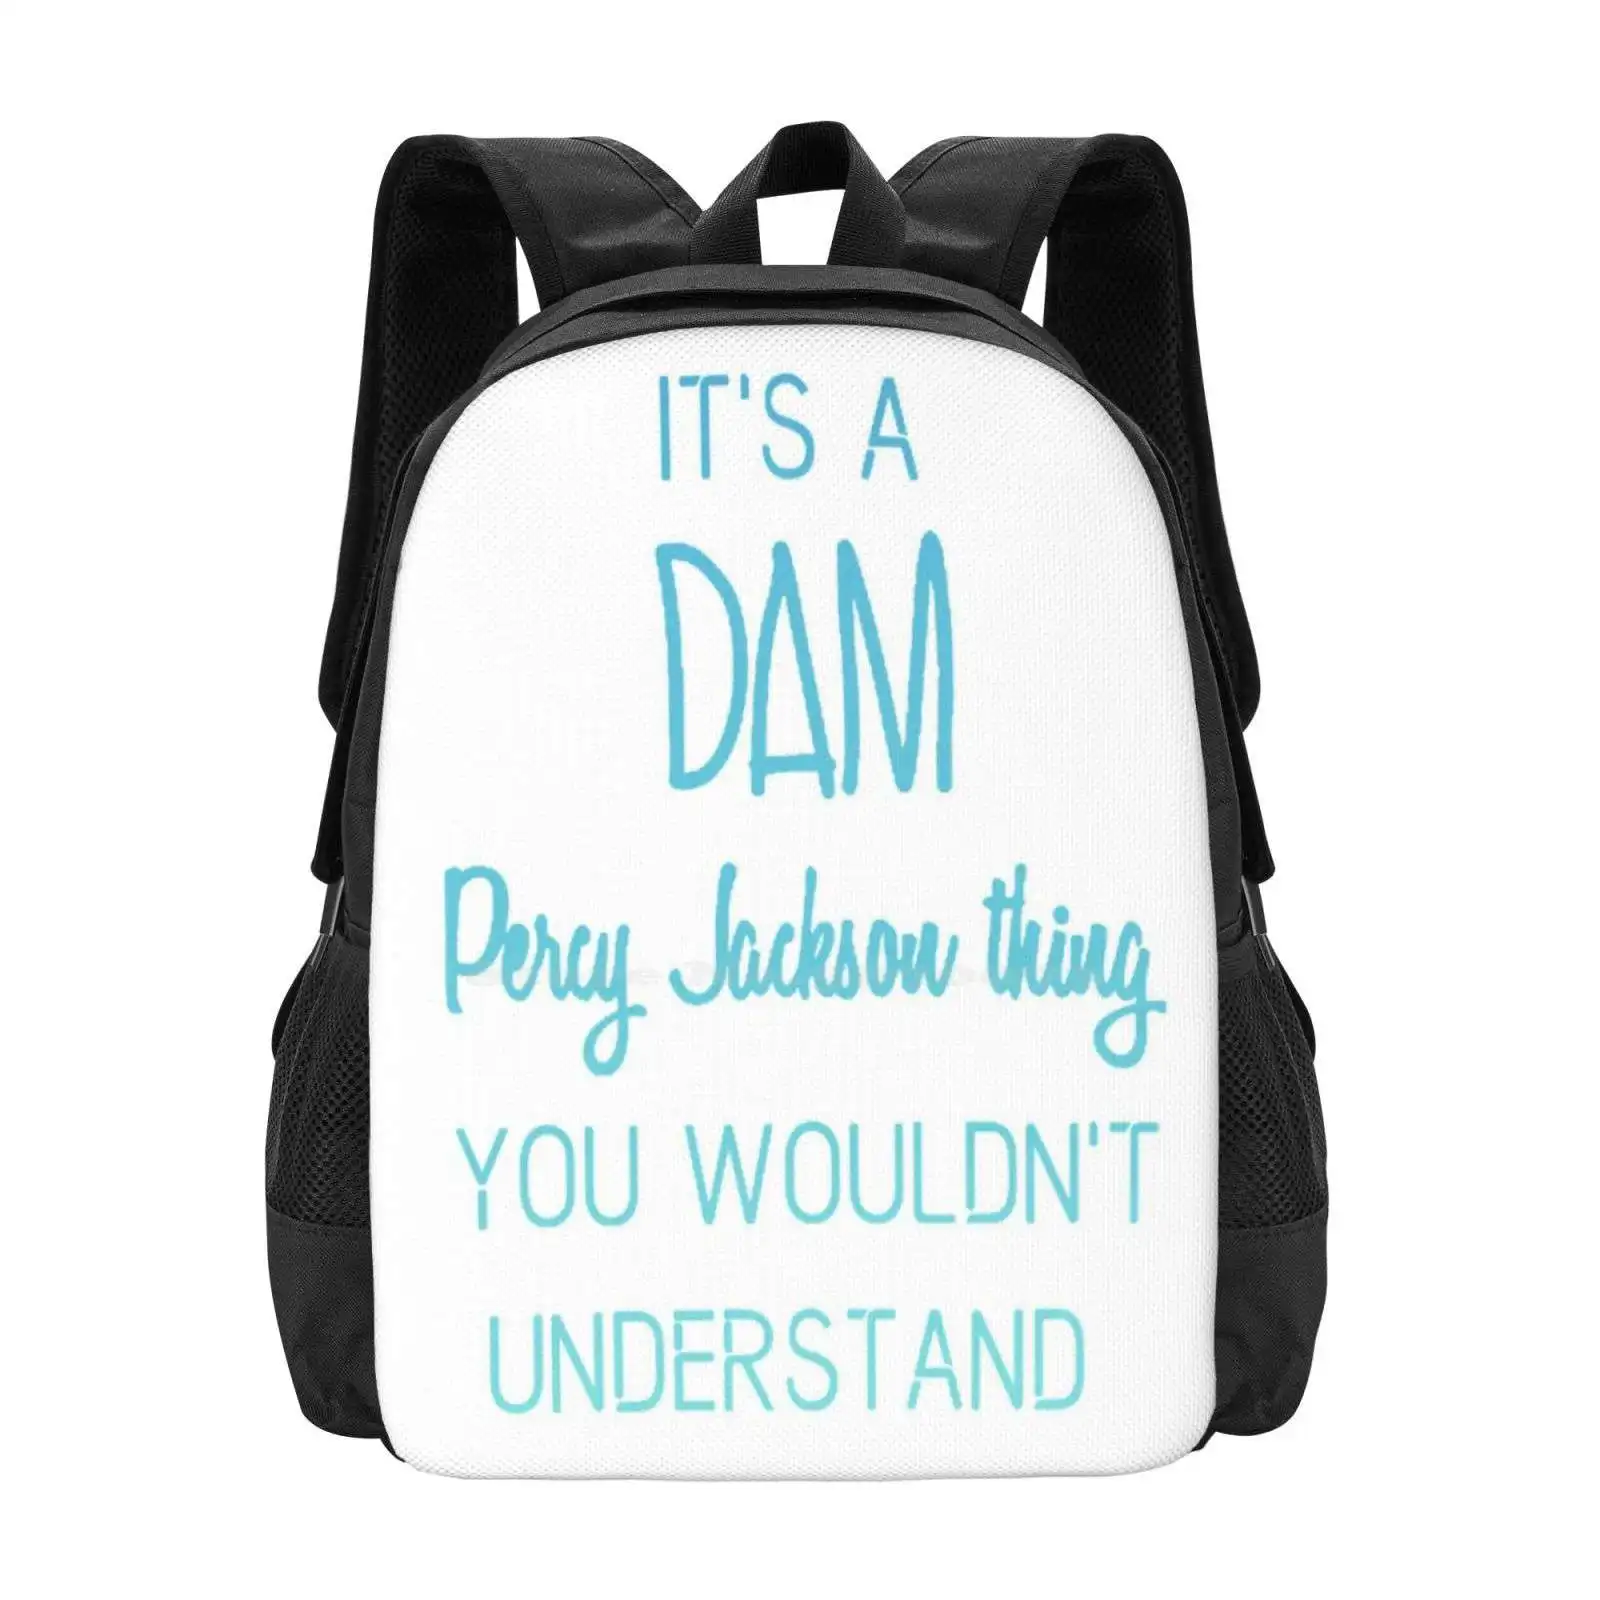 

Dam Percy Jackson Thing Bag Backpack For Men Women Girls Teenage Percy Jackson Dam Thing You Wouldnt Understand Fandom A